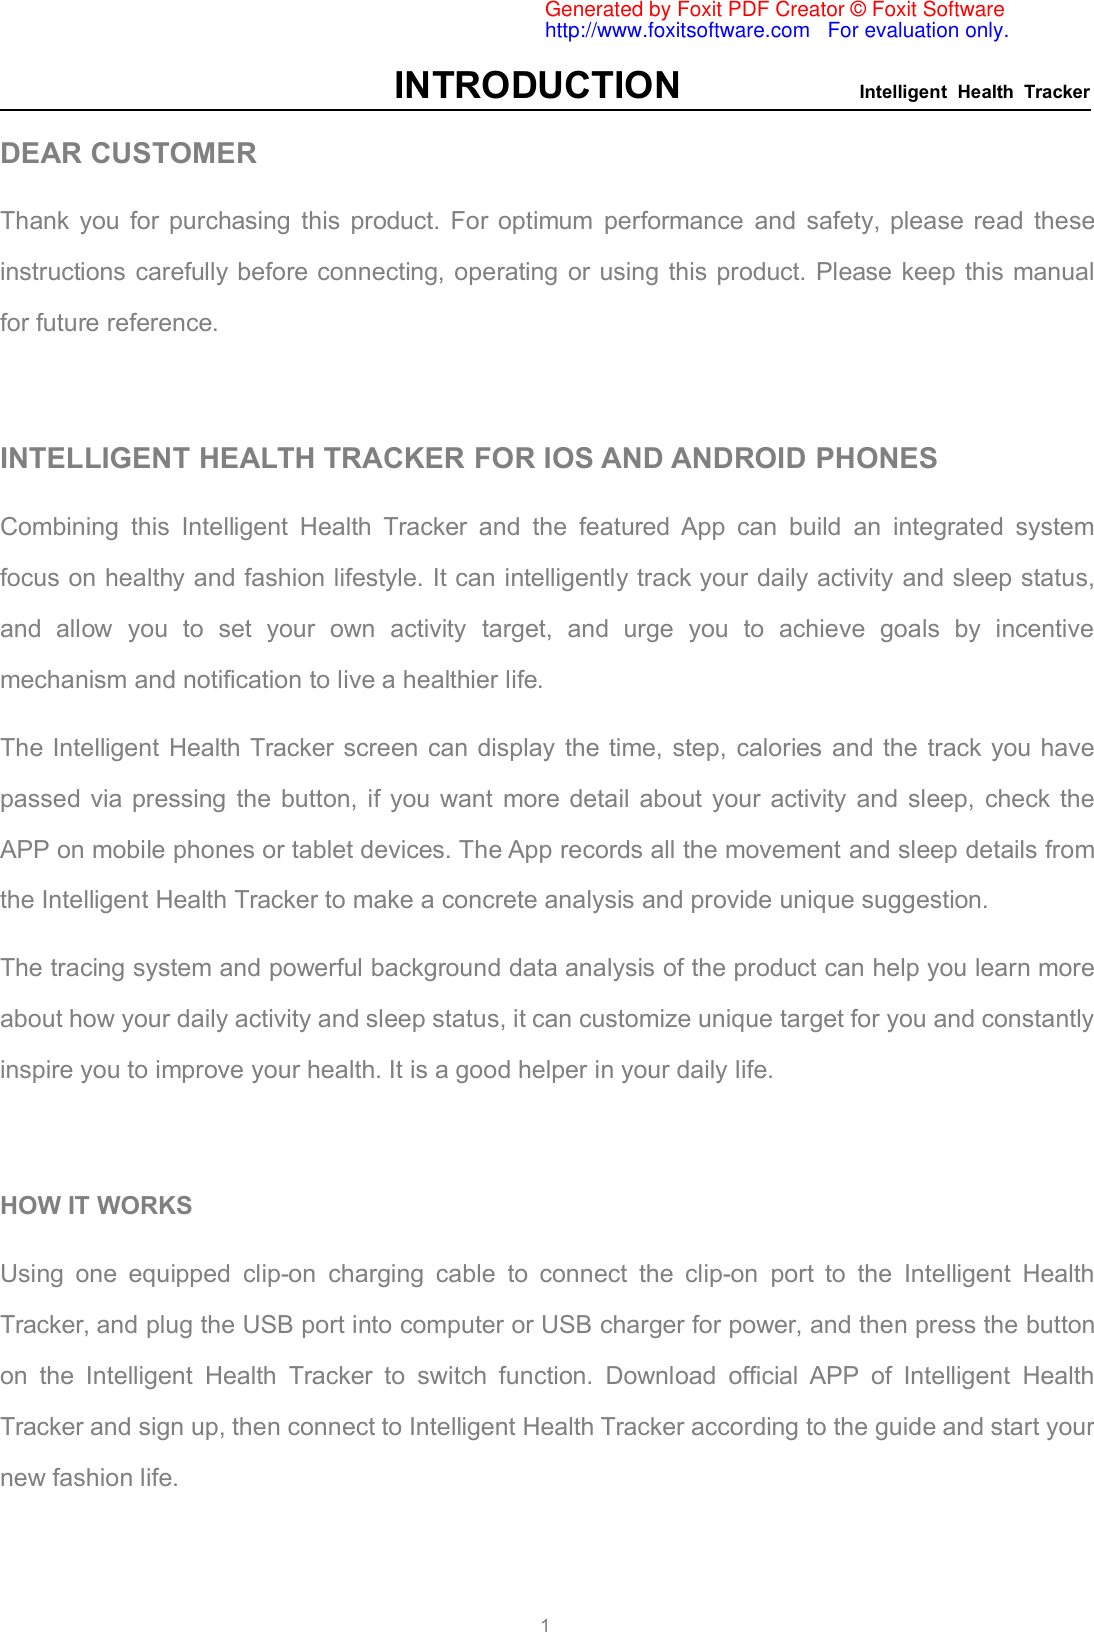 INTRODUCTION Intelligent Health Tracker1DEAR CUSTOMERThank you for purchasing this product. For optimum performance and safety, please read theseinstructions carefully before connecting, operating or using this product. Please keep this manualfor future reference.INTELLIGENT HEALTH TRACKER FOR IOS AND ANDROID PHONESCombining this Intelligent Health Tracker and the featured App can build an integrated systemfocus on healthy and fashion lifestyle. It can intelligently track your daily activity and sleep status,and allow you to set your own activity target, and urge you to achieve goals by incentivemechanism and notification to live a healthier life.The Intelligent Health Tracker screen can display the time, step, calories and the track you havepassed via pressing the button, if you want more detail about your activity and sleep, check theAPP on mobile phones or tablet devices. The App records all the movement and sleep details fromthe Intelligent Health Tracker to make a concrete analysis and provide unique suggestion.The tracing system and powerful background data analysis of the product can help you learn moreabout how your daily activity and sleep status, it can customize unique target for you and constantlyinspire you to improve your health. It is a good helper in your daily life.HOW IT WORKSUsing one equipped clip-on charging cable to connect the clip-on port to the Intelligent HealthTracker, and plug the USB port into computer or USB charger for power, and then press the buttonon the Intelligent Health Tracker to switch function. Download official APP of Intelligent HealthTracker and sign up, then connect to Intelligent Health Tracker according to the guide and start yournew fashion life.Generated by Foxit PDF Creator © Foxit Softwarehttp://www.foxitsoftware.com   For evaluation only.